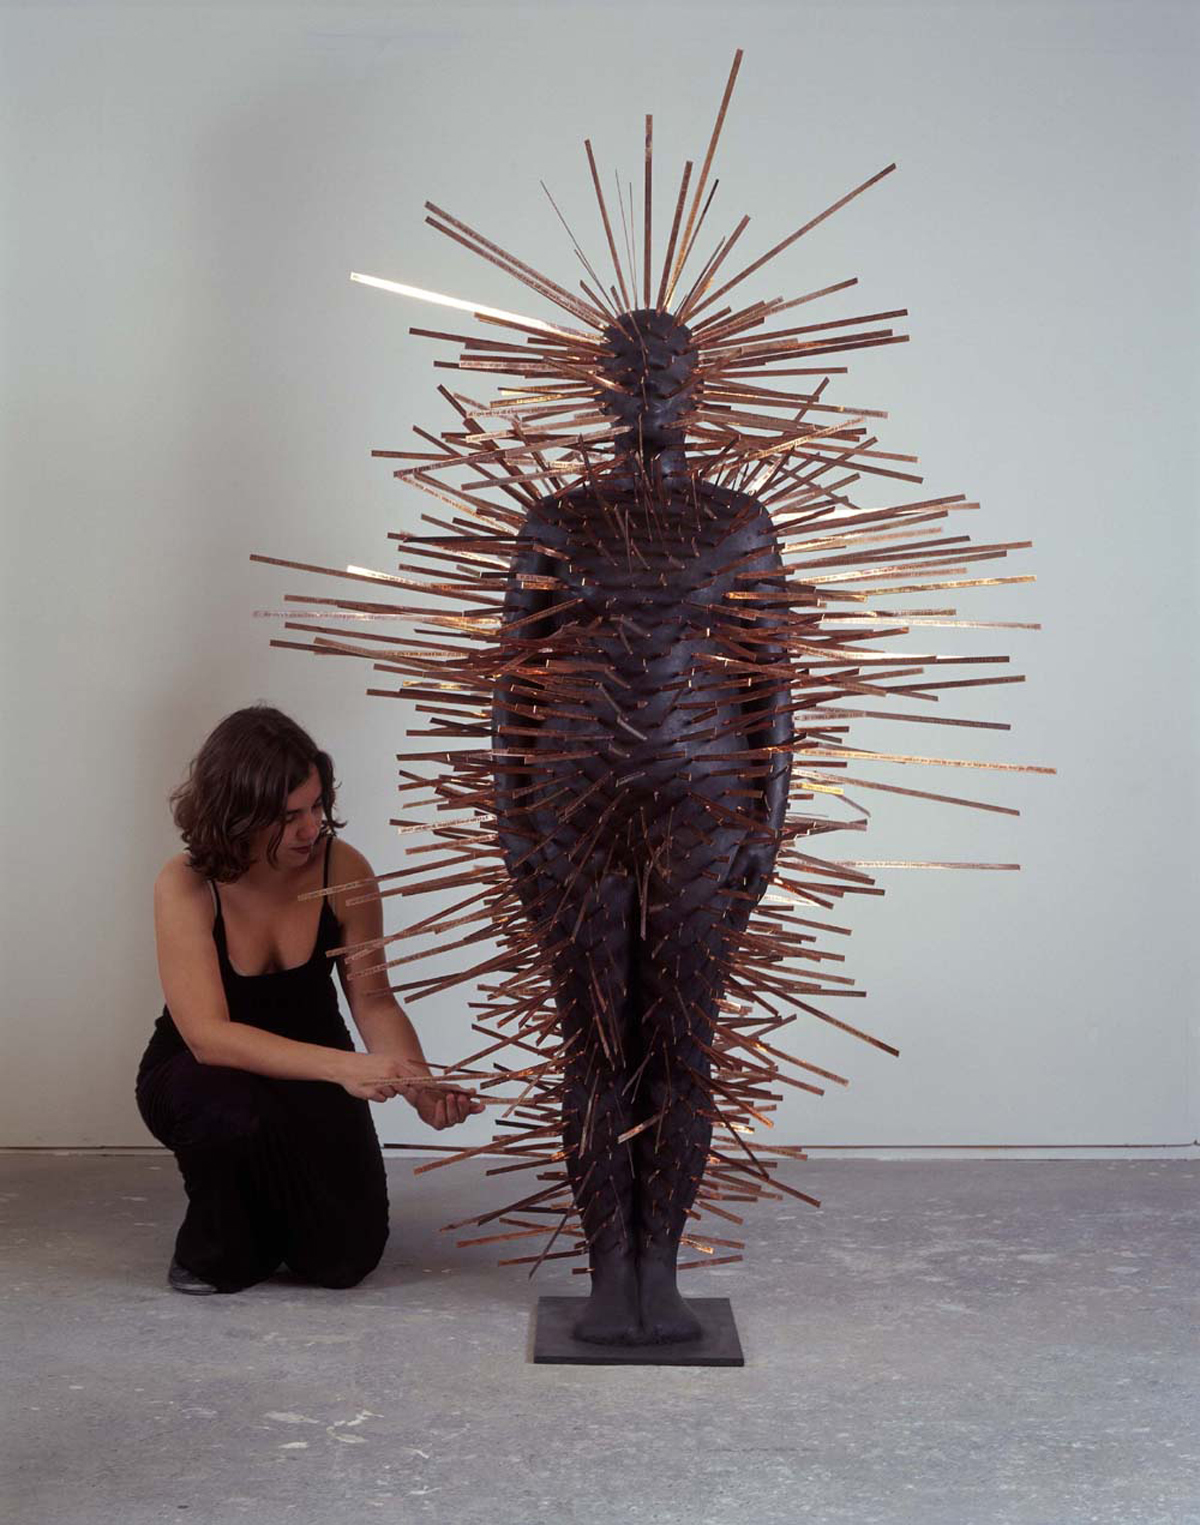 Text Me (2002-03), Bronze and Copper, Edition of 6, 2 Artist's Copies, 200 x 150 x 150cm